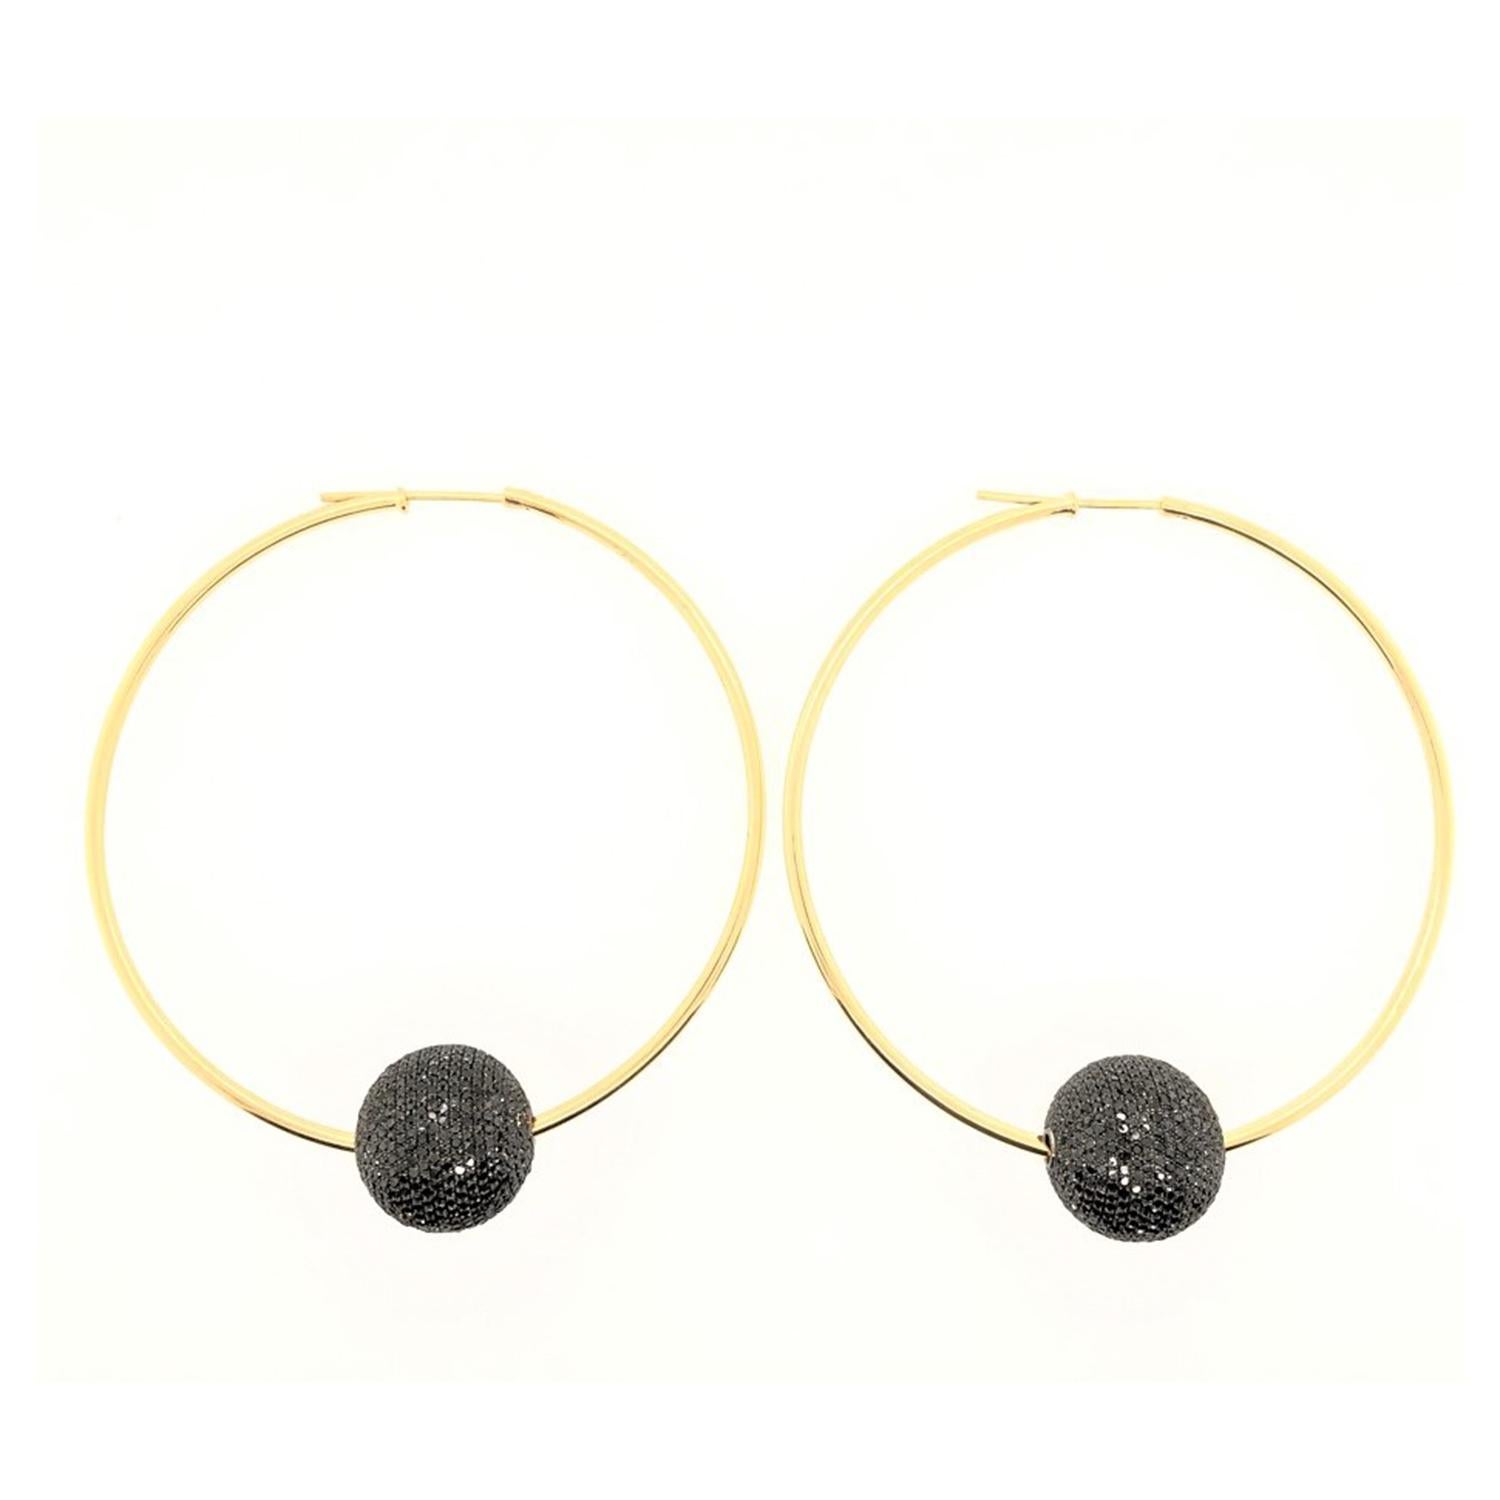 Round Cut Black Diamond Ball Hoop Earrings Made in 18k Gold For Sale